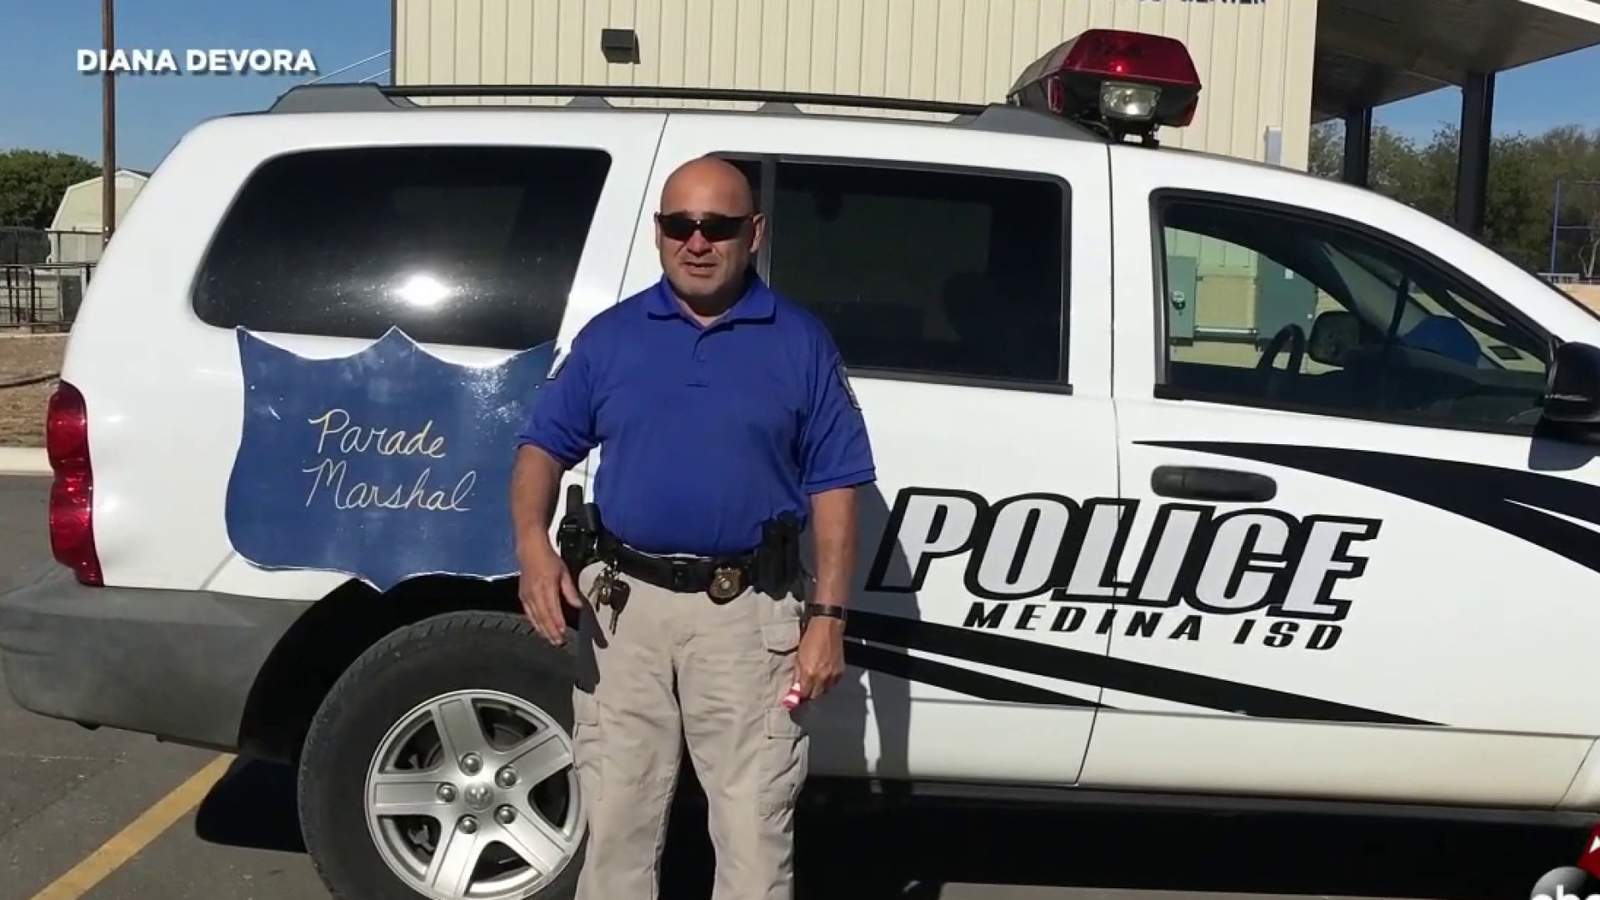 Medina ISD chief of police asks other people not to play with their health after suffering a heart attack, dying for 15 minutes